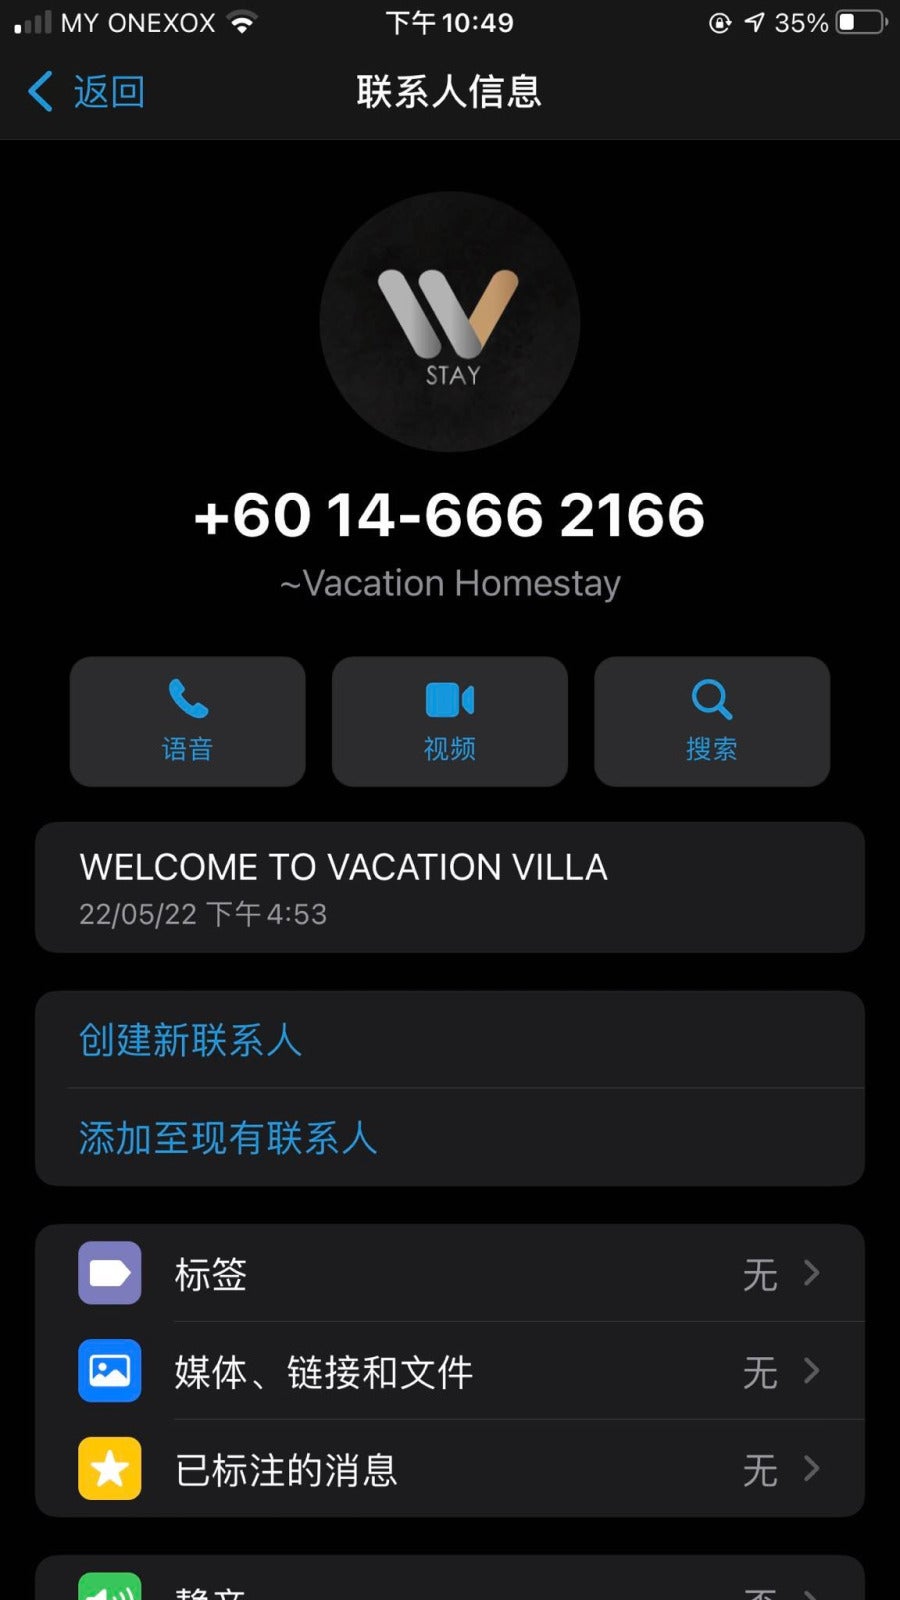 phone number scaled